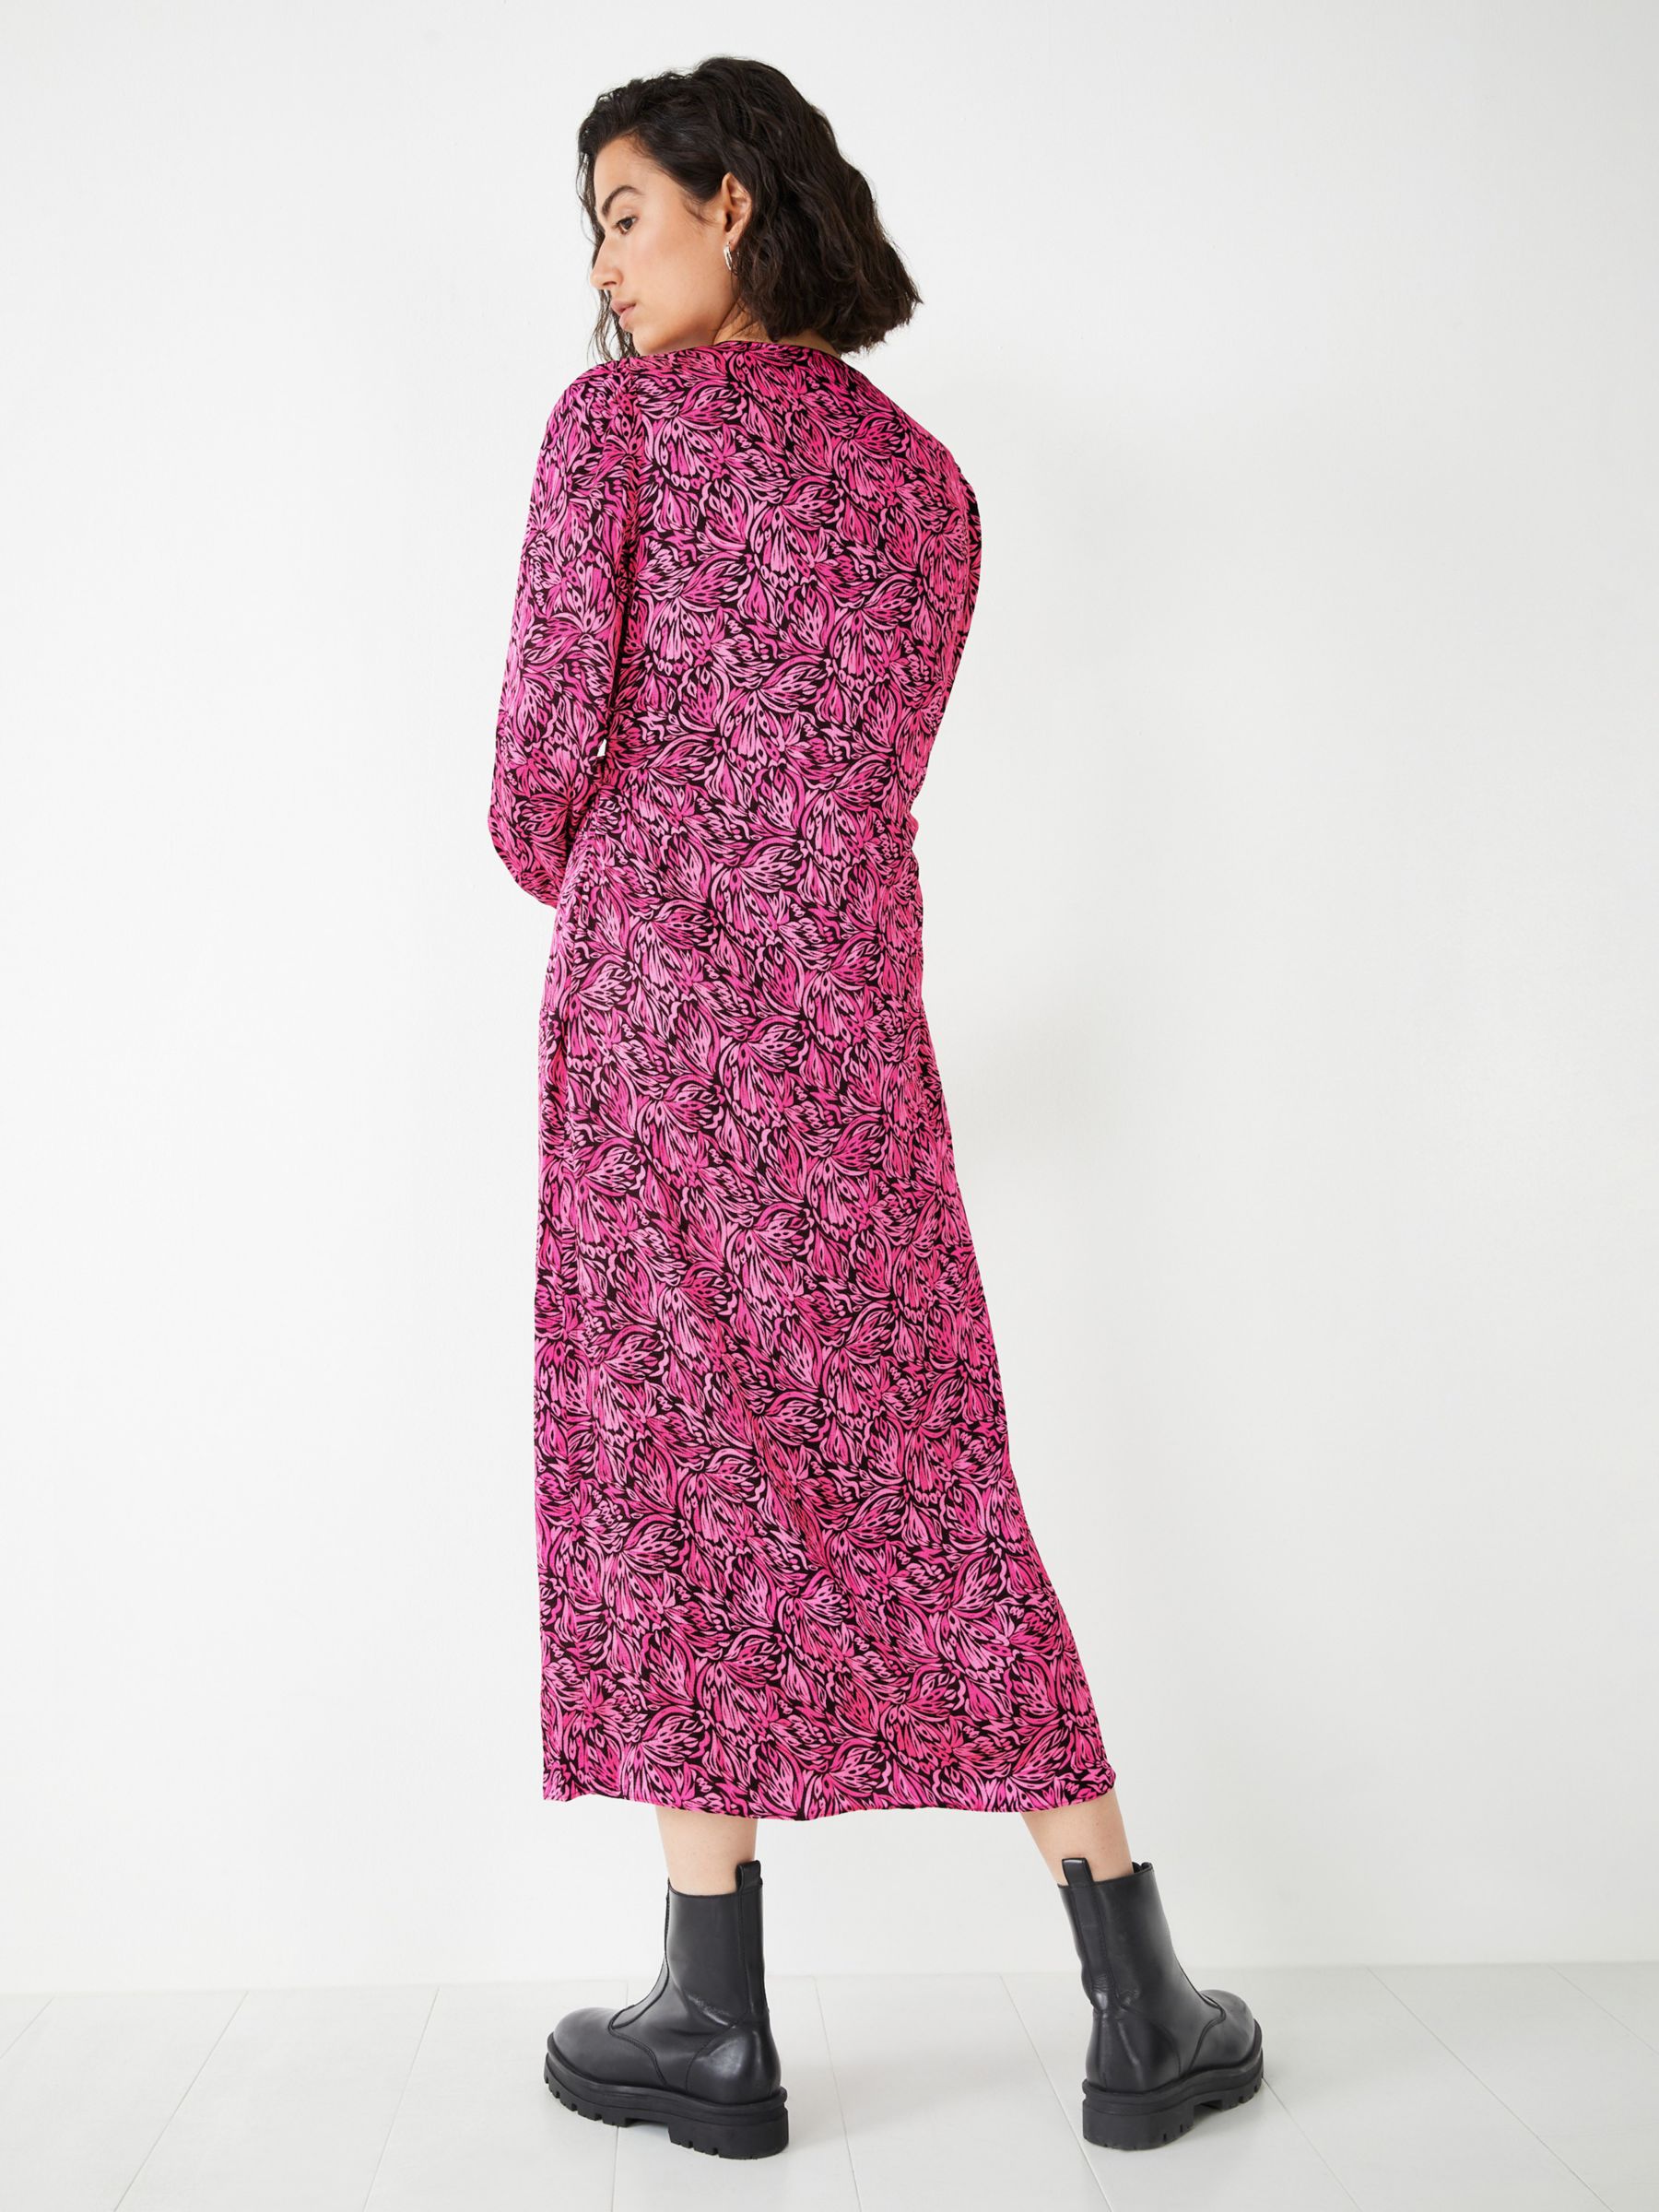 Buy HUSH Lucia Butterfly Floral Print Midi Dress Online at johnlewis.com